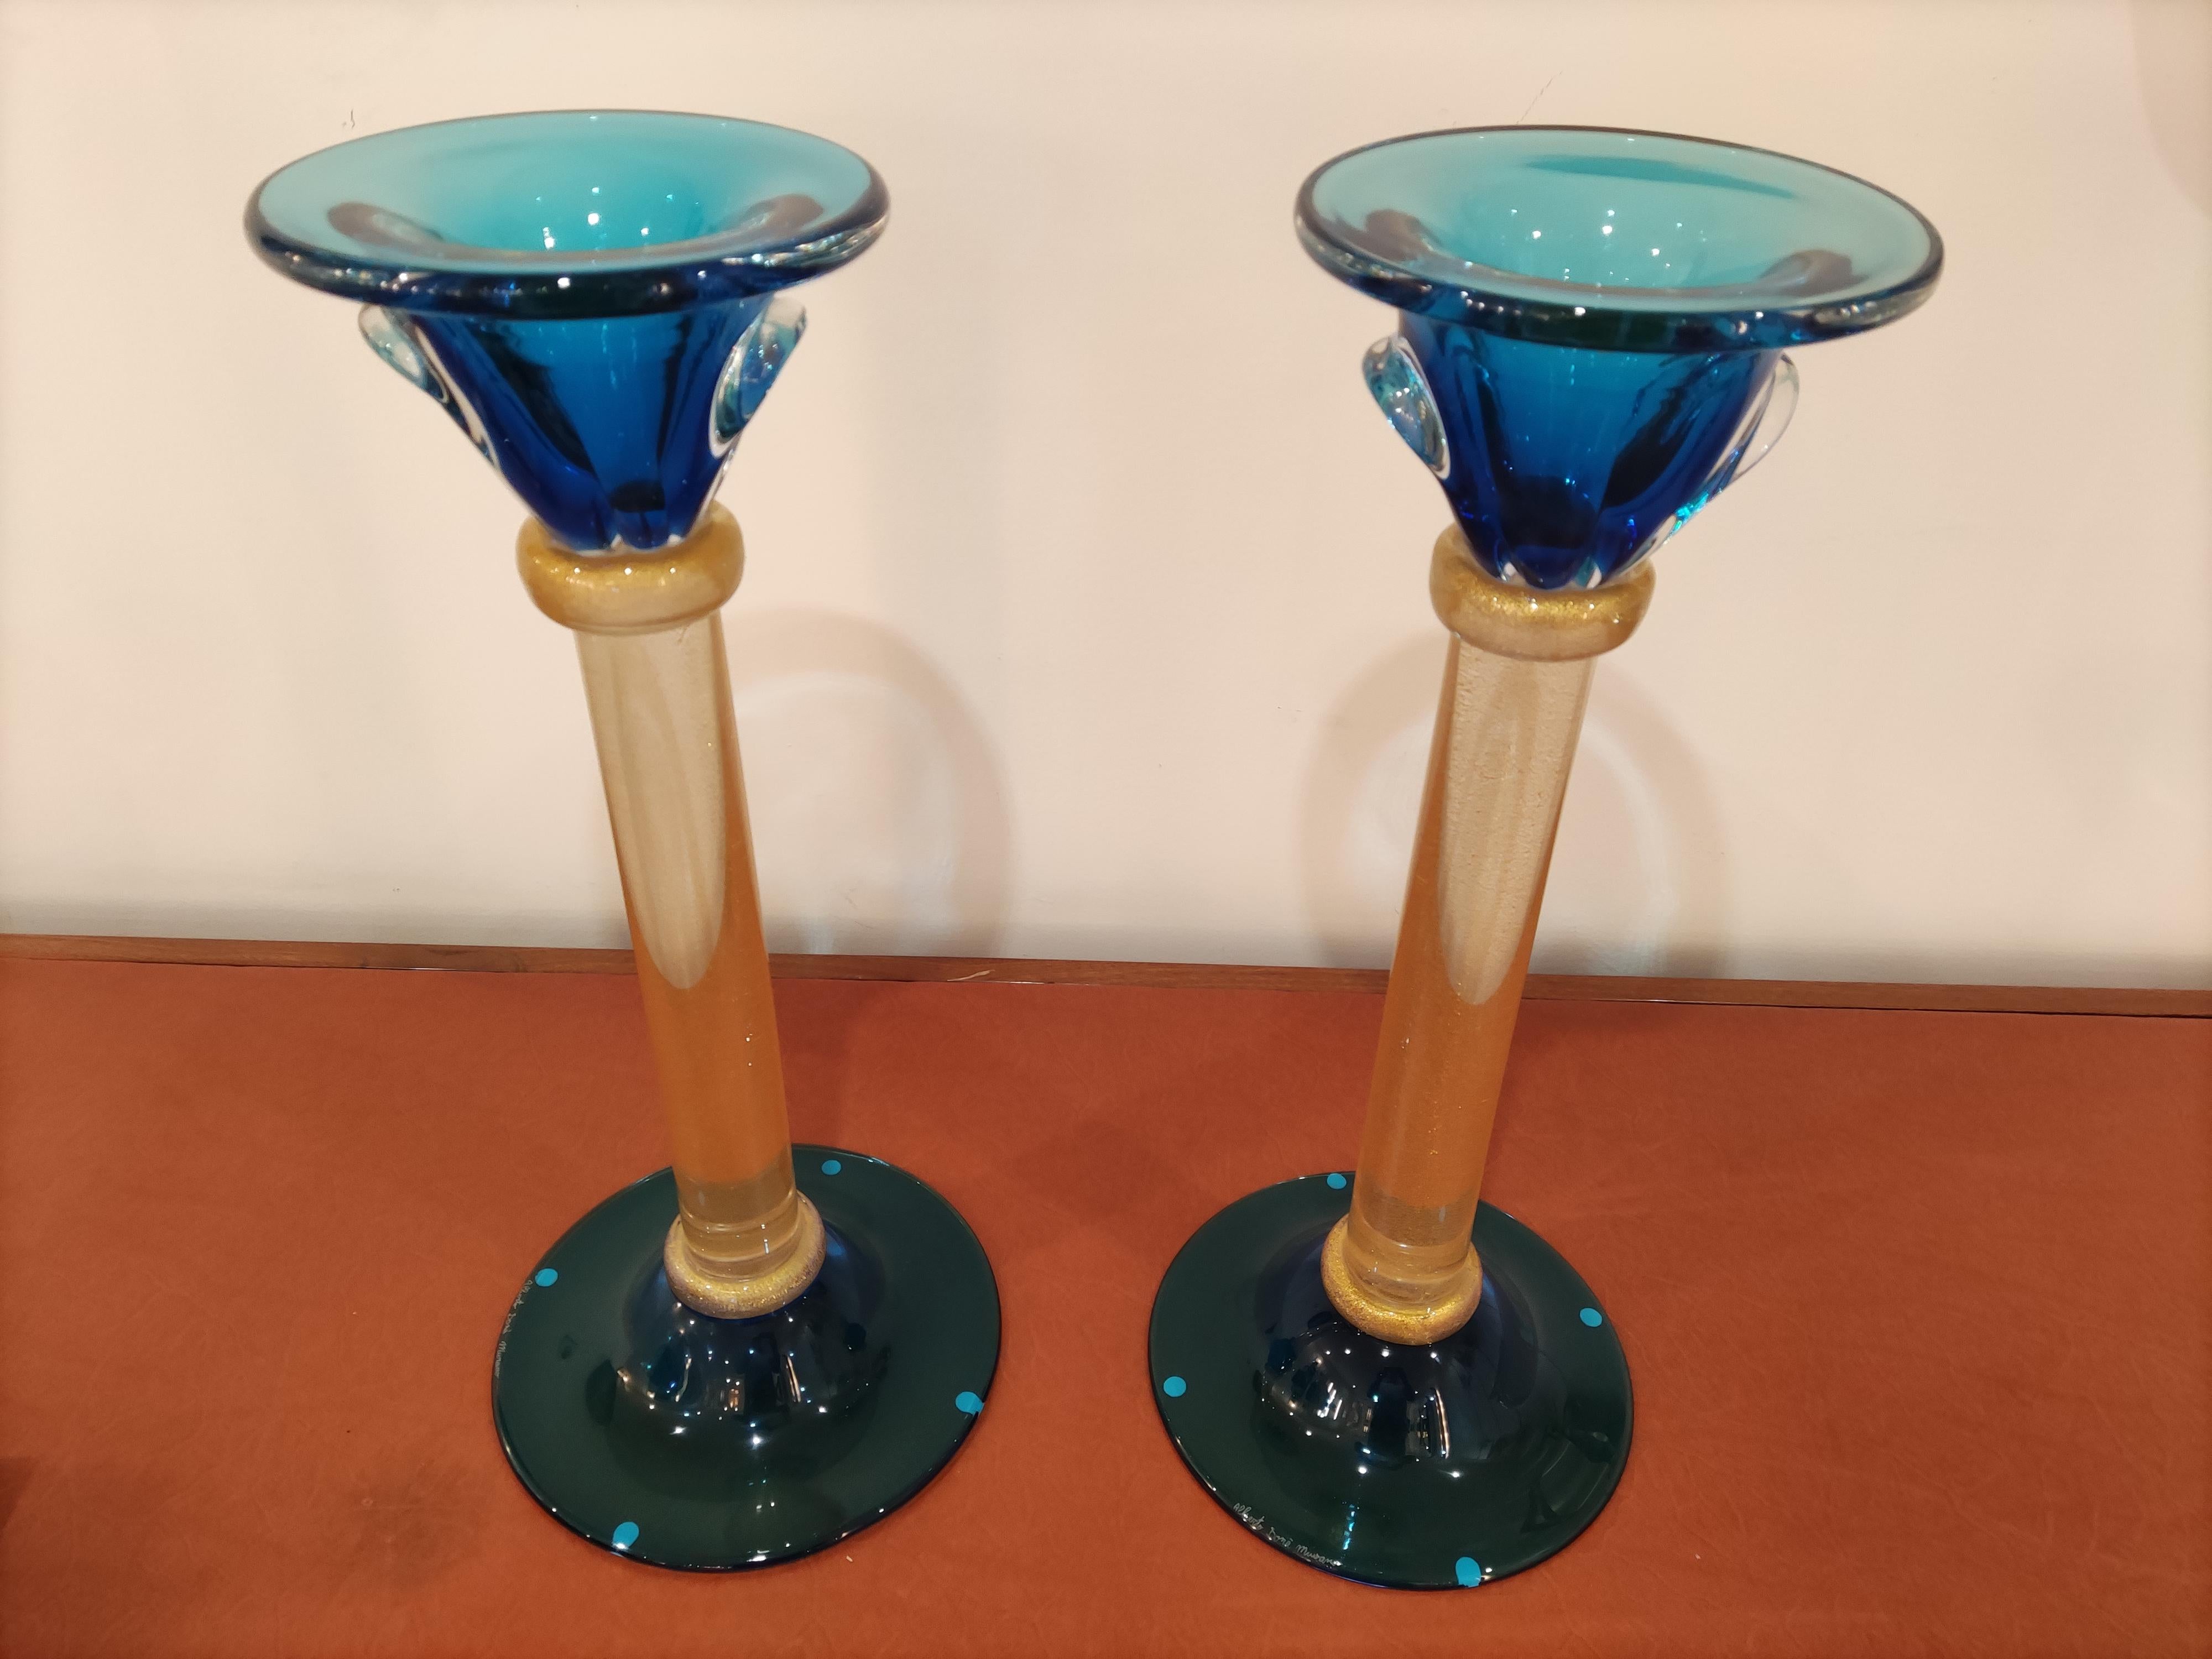 Murano Glass Pair of Candlesticks by Alberto Donà For Sale 1